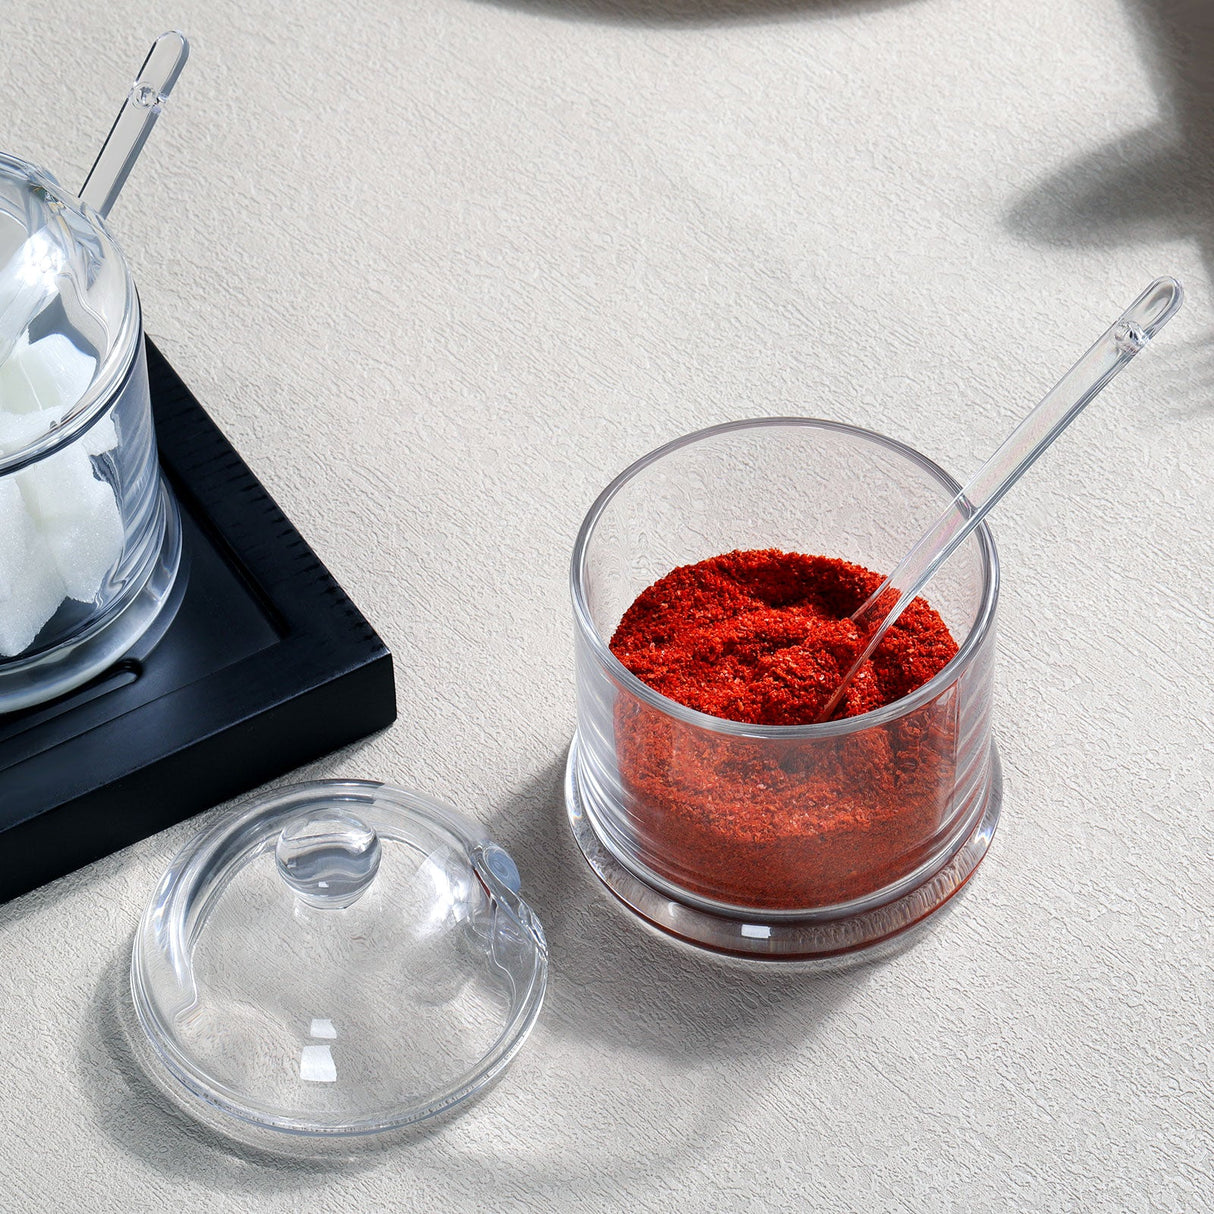 Glass Spice Boxes with Lid and Spoon